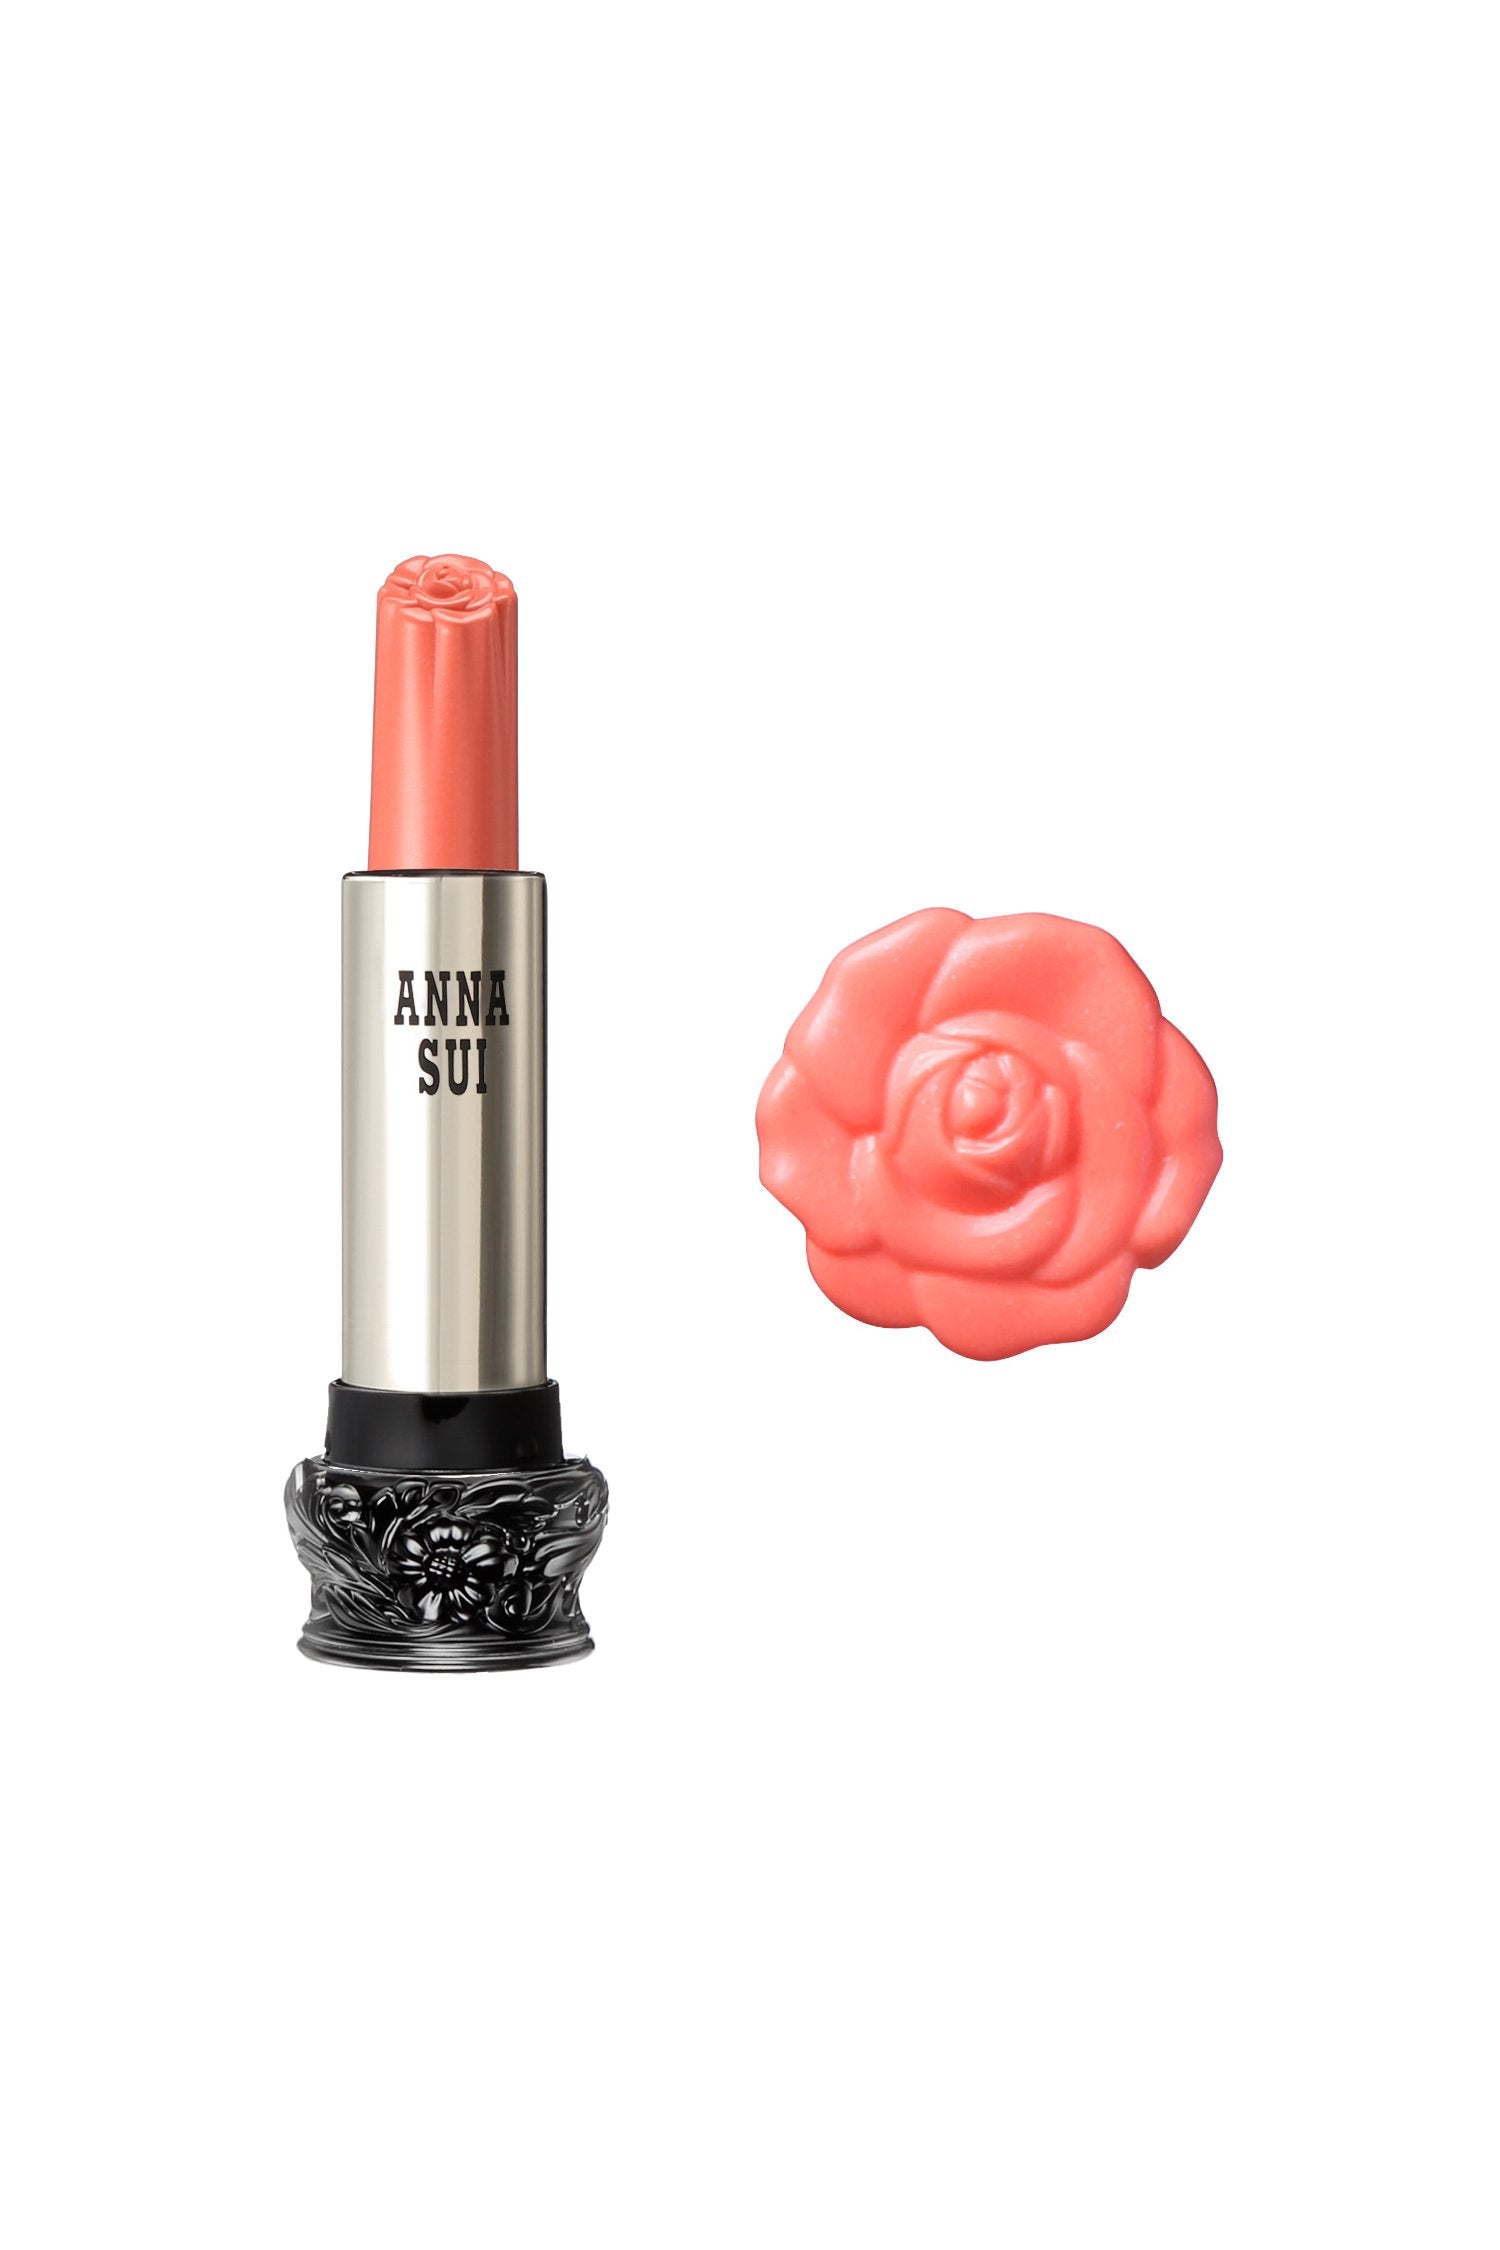 600 - Coral Sweet Pea Lipstick F: Fairy Flower, in a cylindrical container, large black base, engraved floral design, metallic body